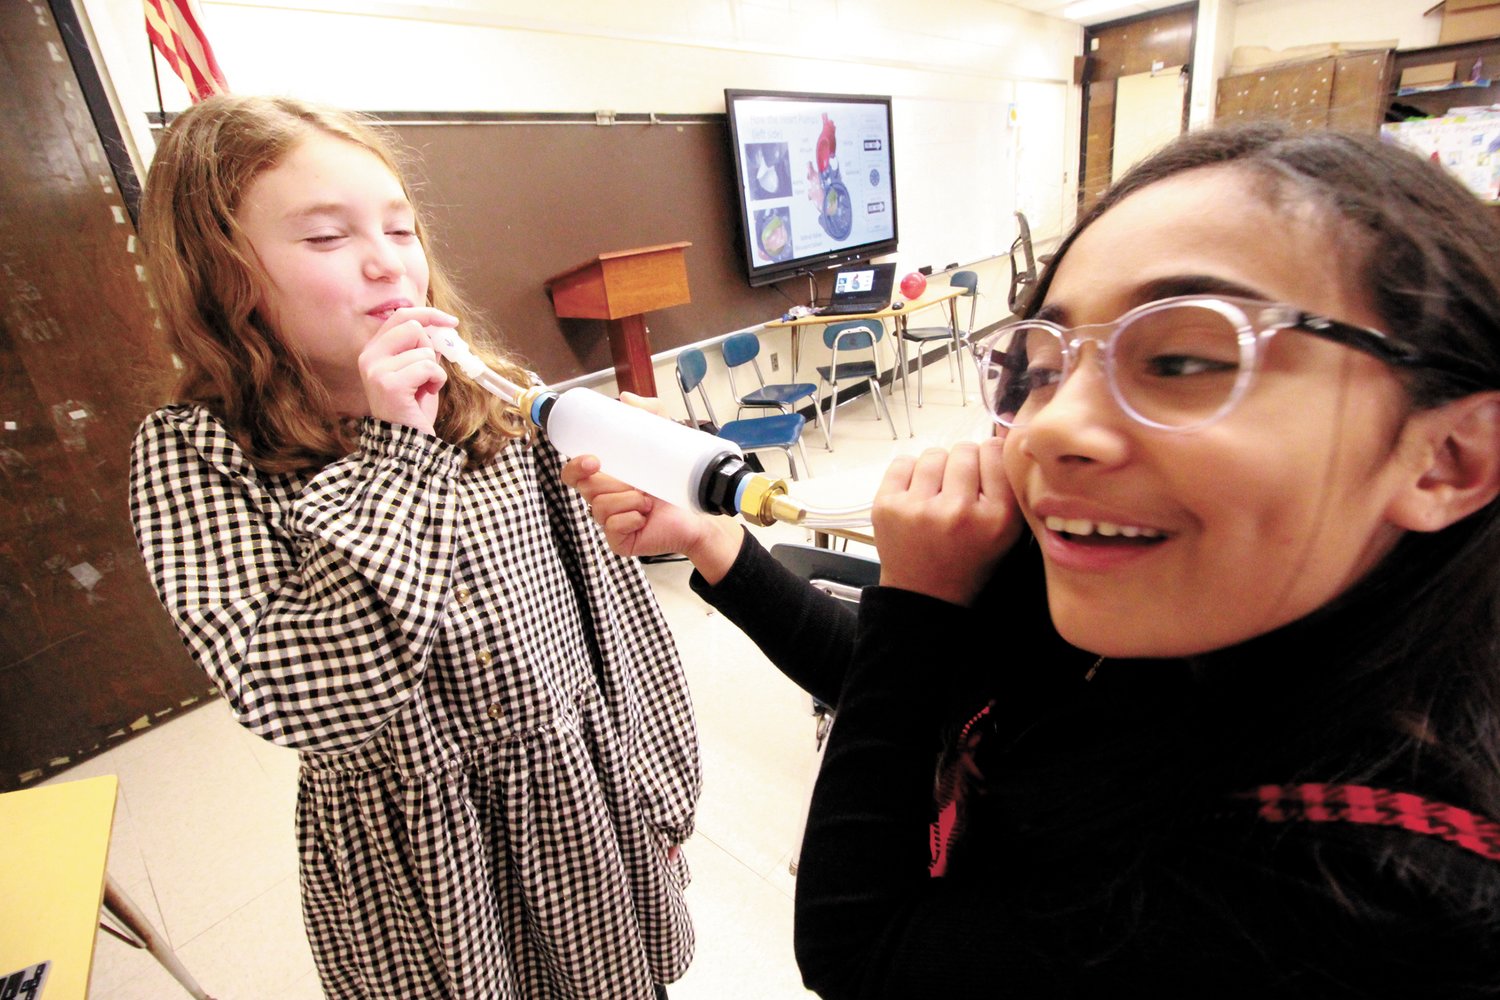 CAN YOU HEAR ME? As they waited their see how a valve and chamber system pump works, Kasidhe Birch and Aryana Cuello explore whether it might also work for communication.